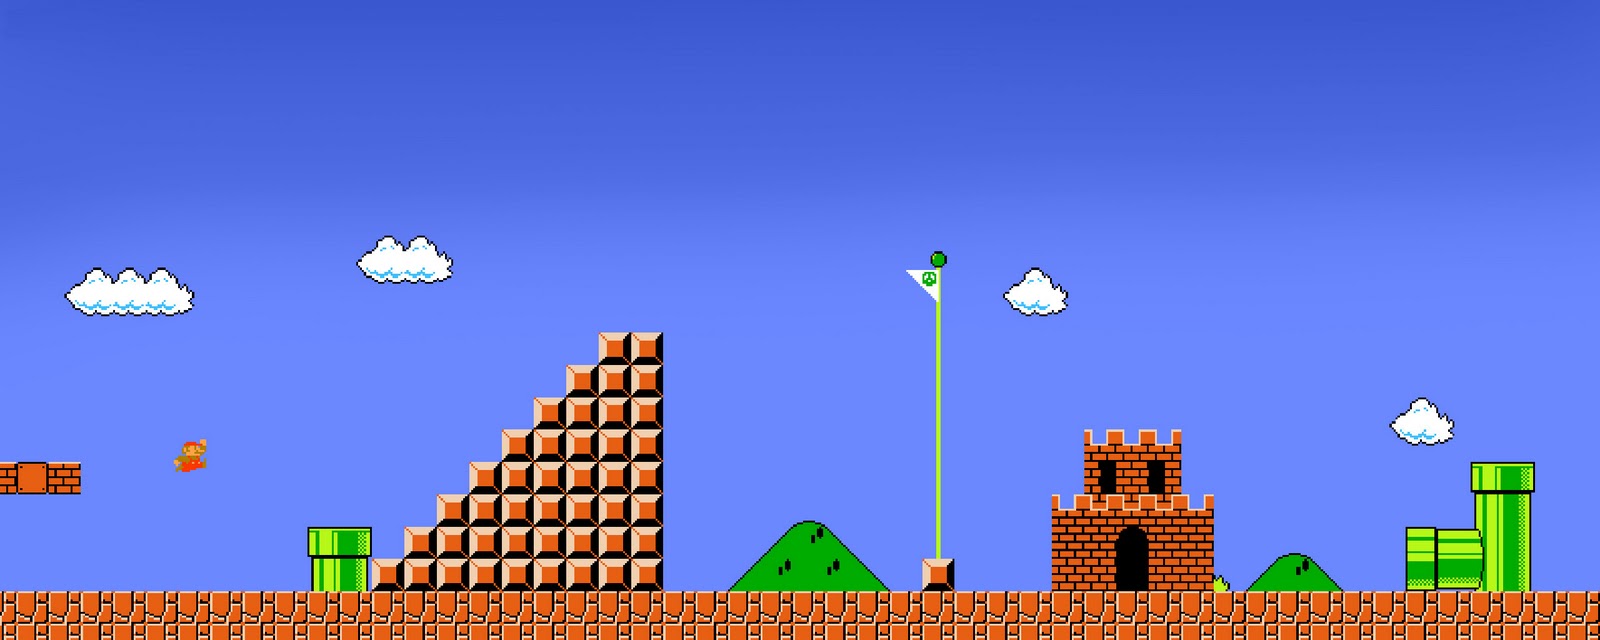 Wallpapers Retro Video Game Post 1600x640